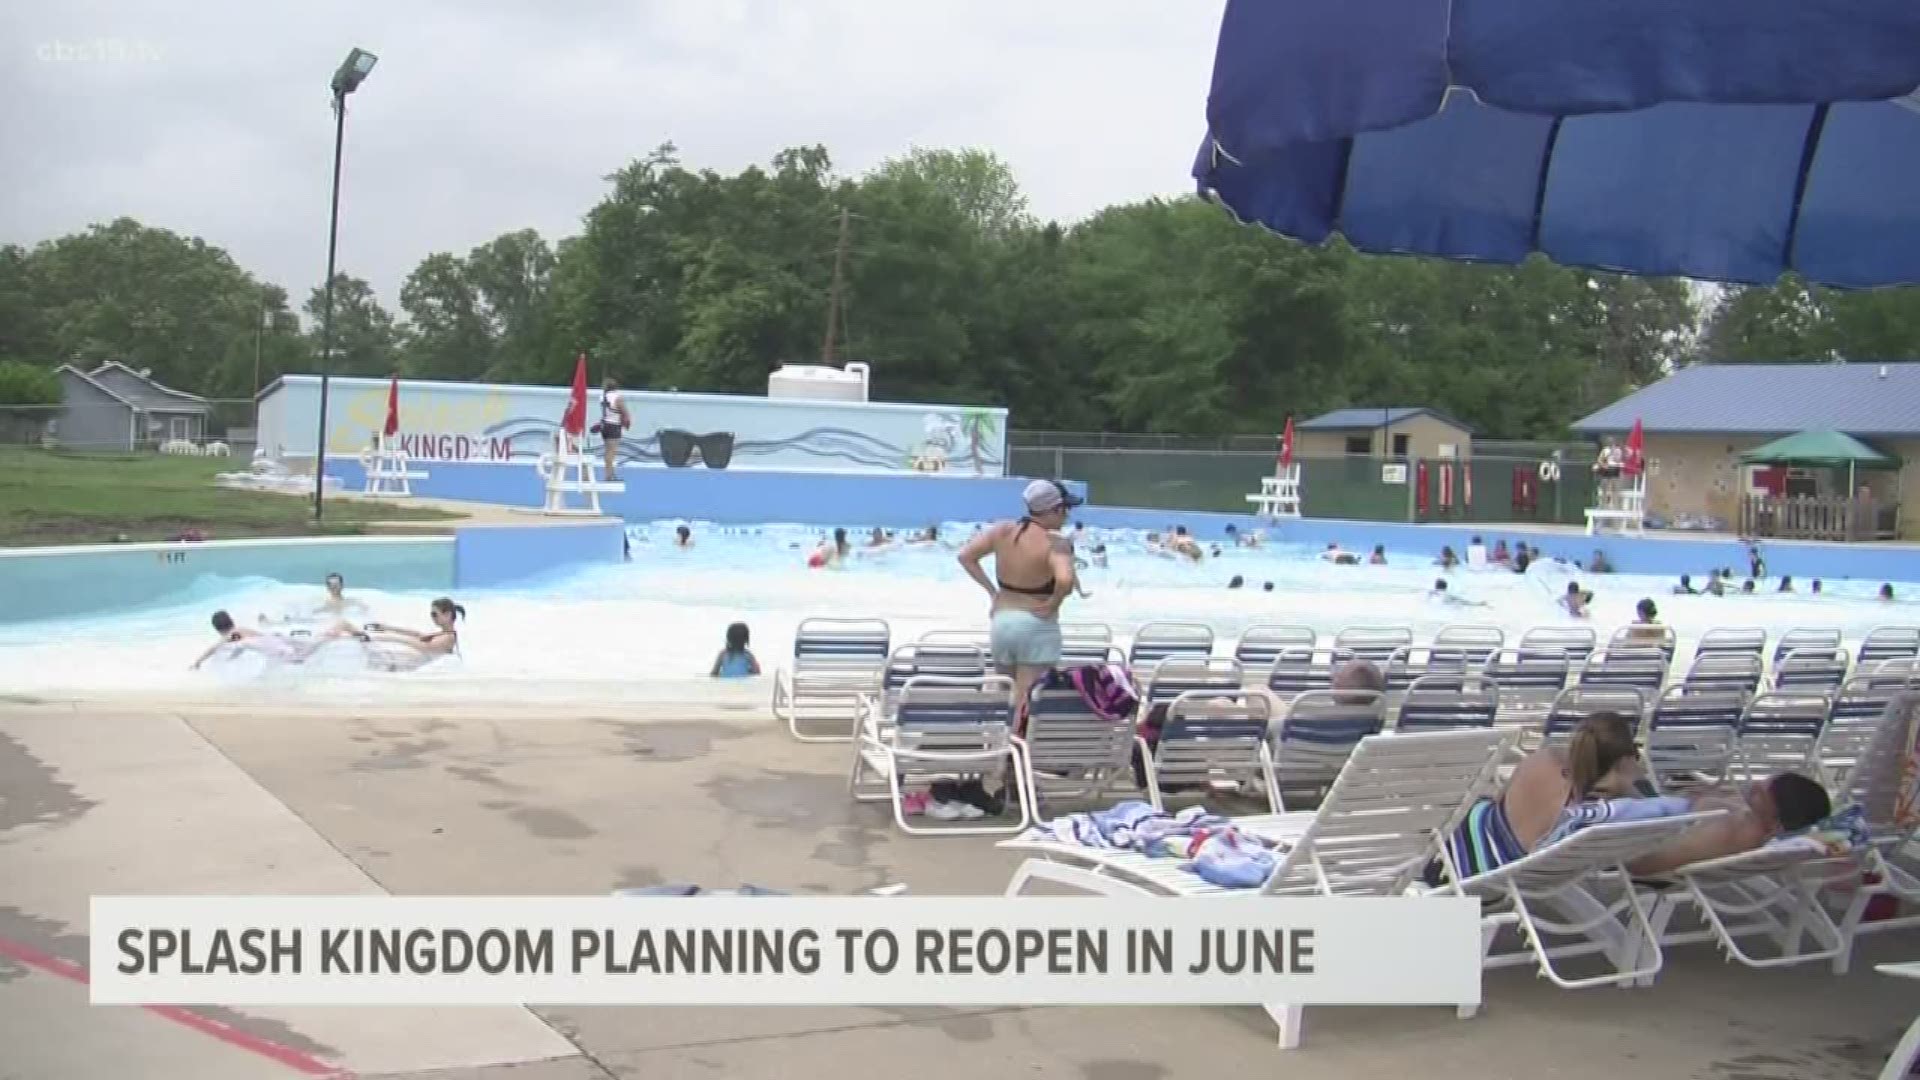 The waterpark says they will open as soon as they get the "green light" from officials.